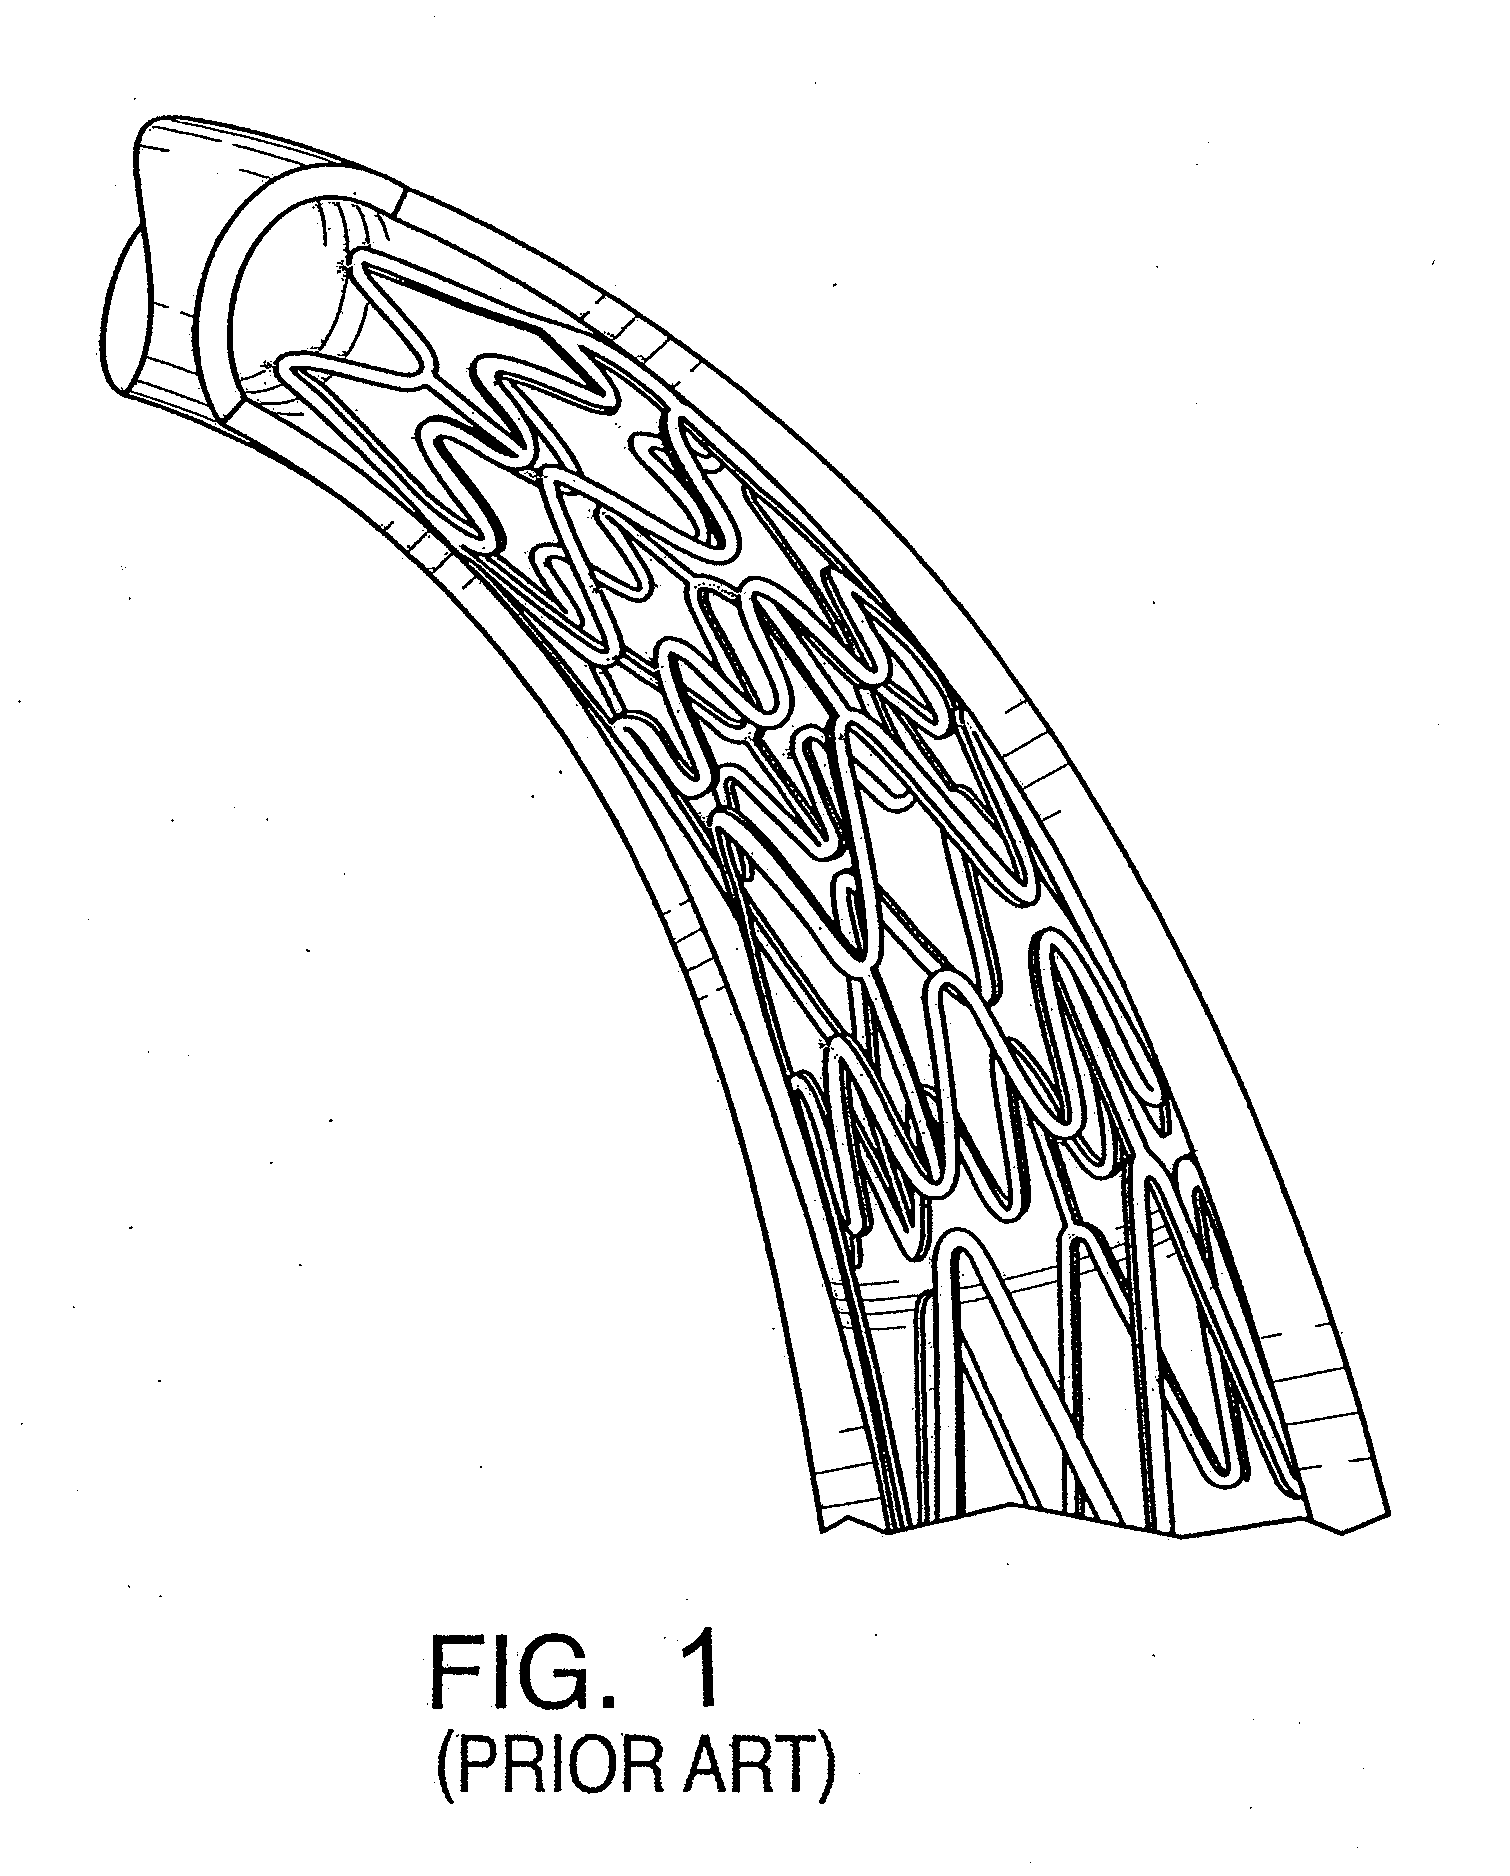 Stent device having focal elevating elements for minimal surface area contact with lumen walls